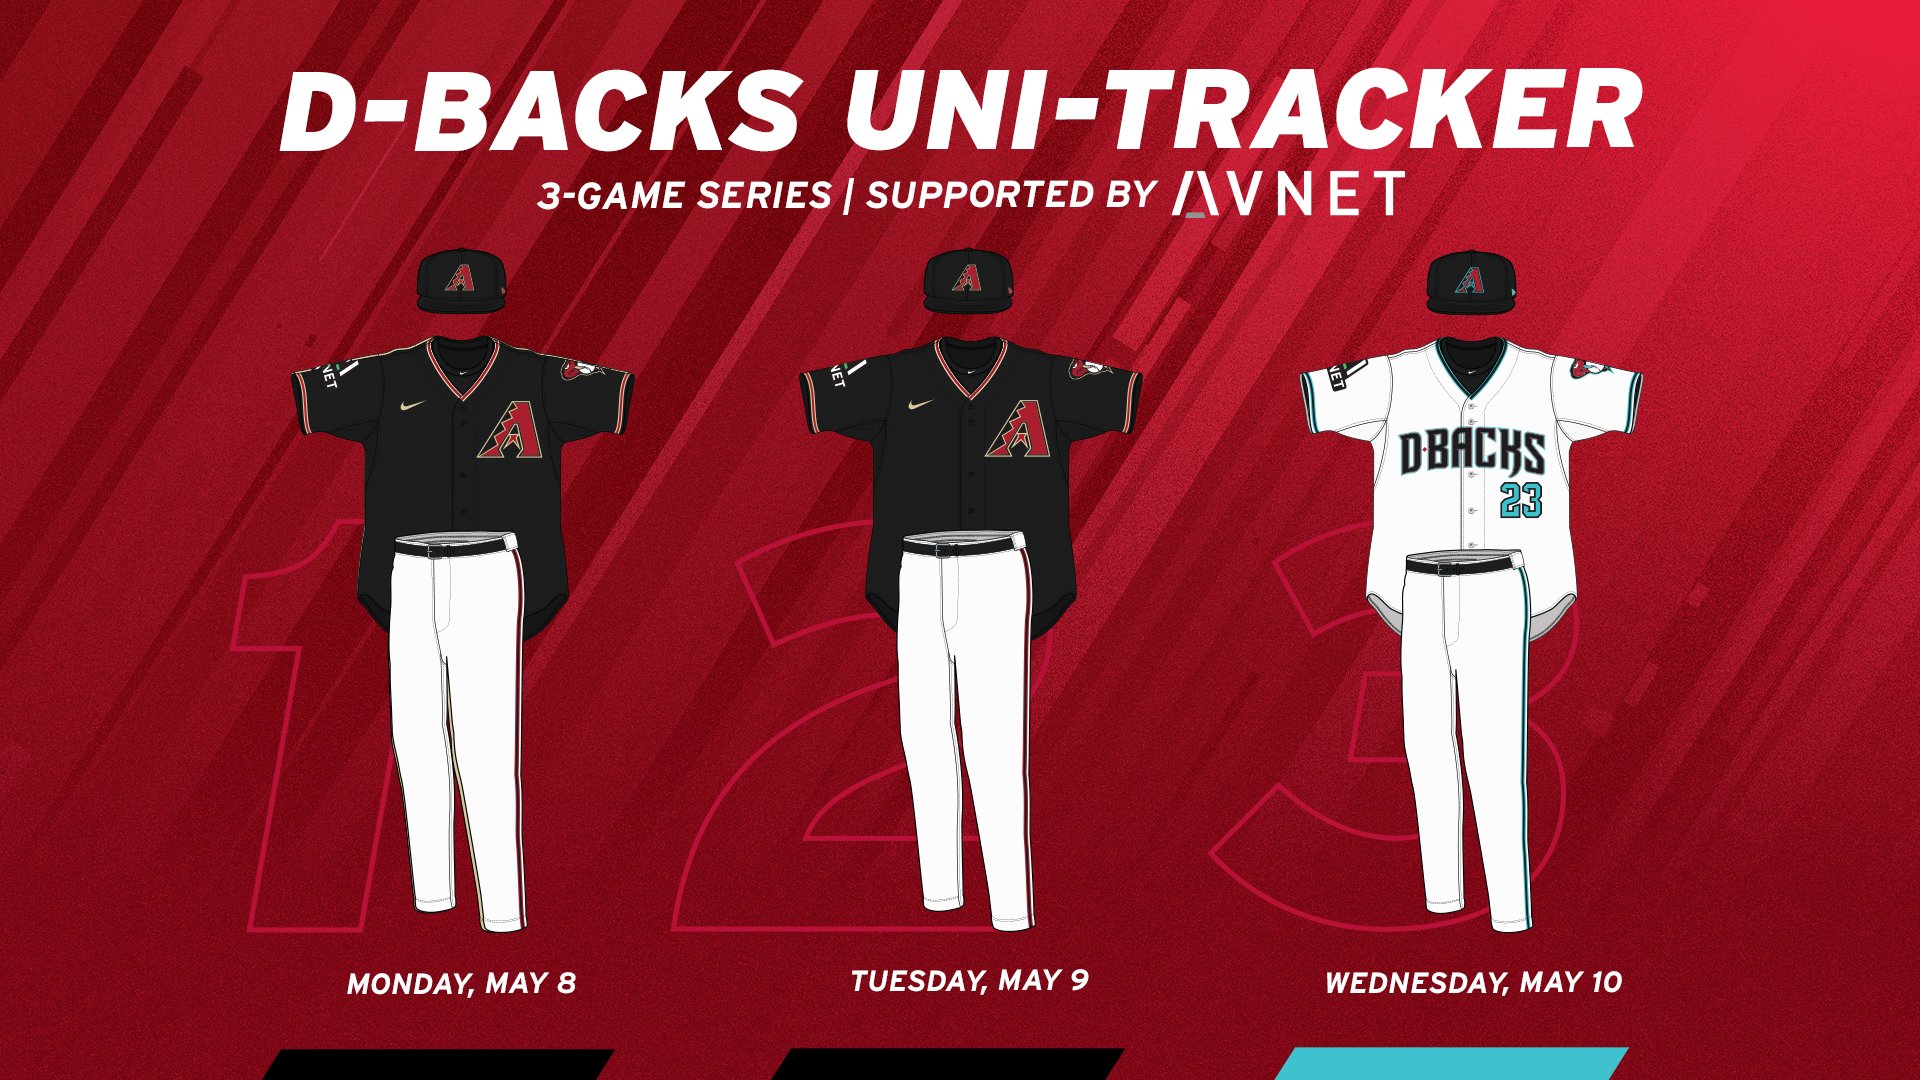 I believe the D-Backs should bring back the teal and purple